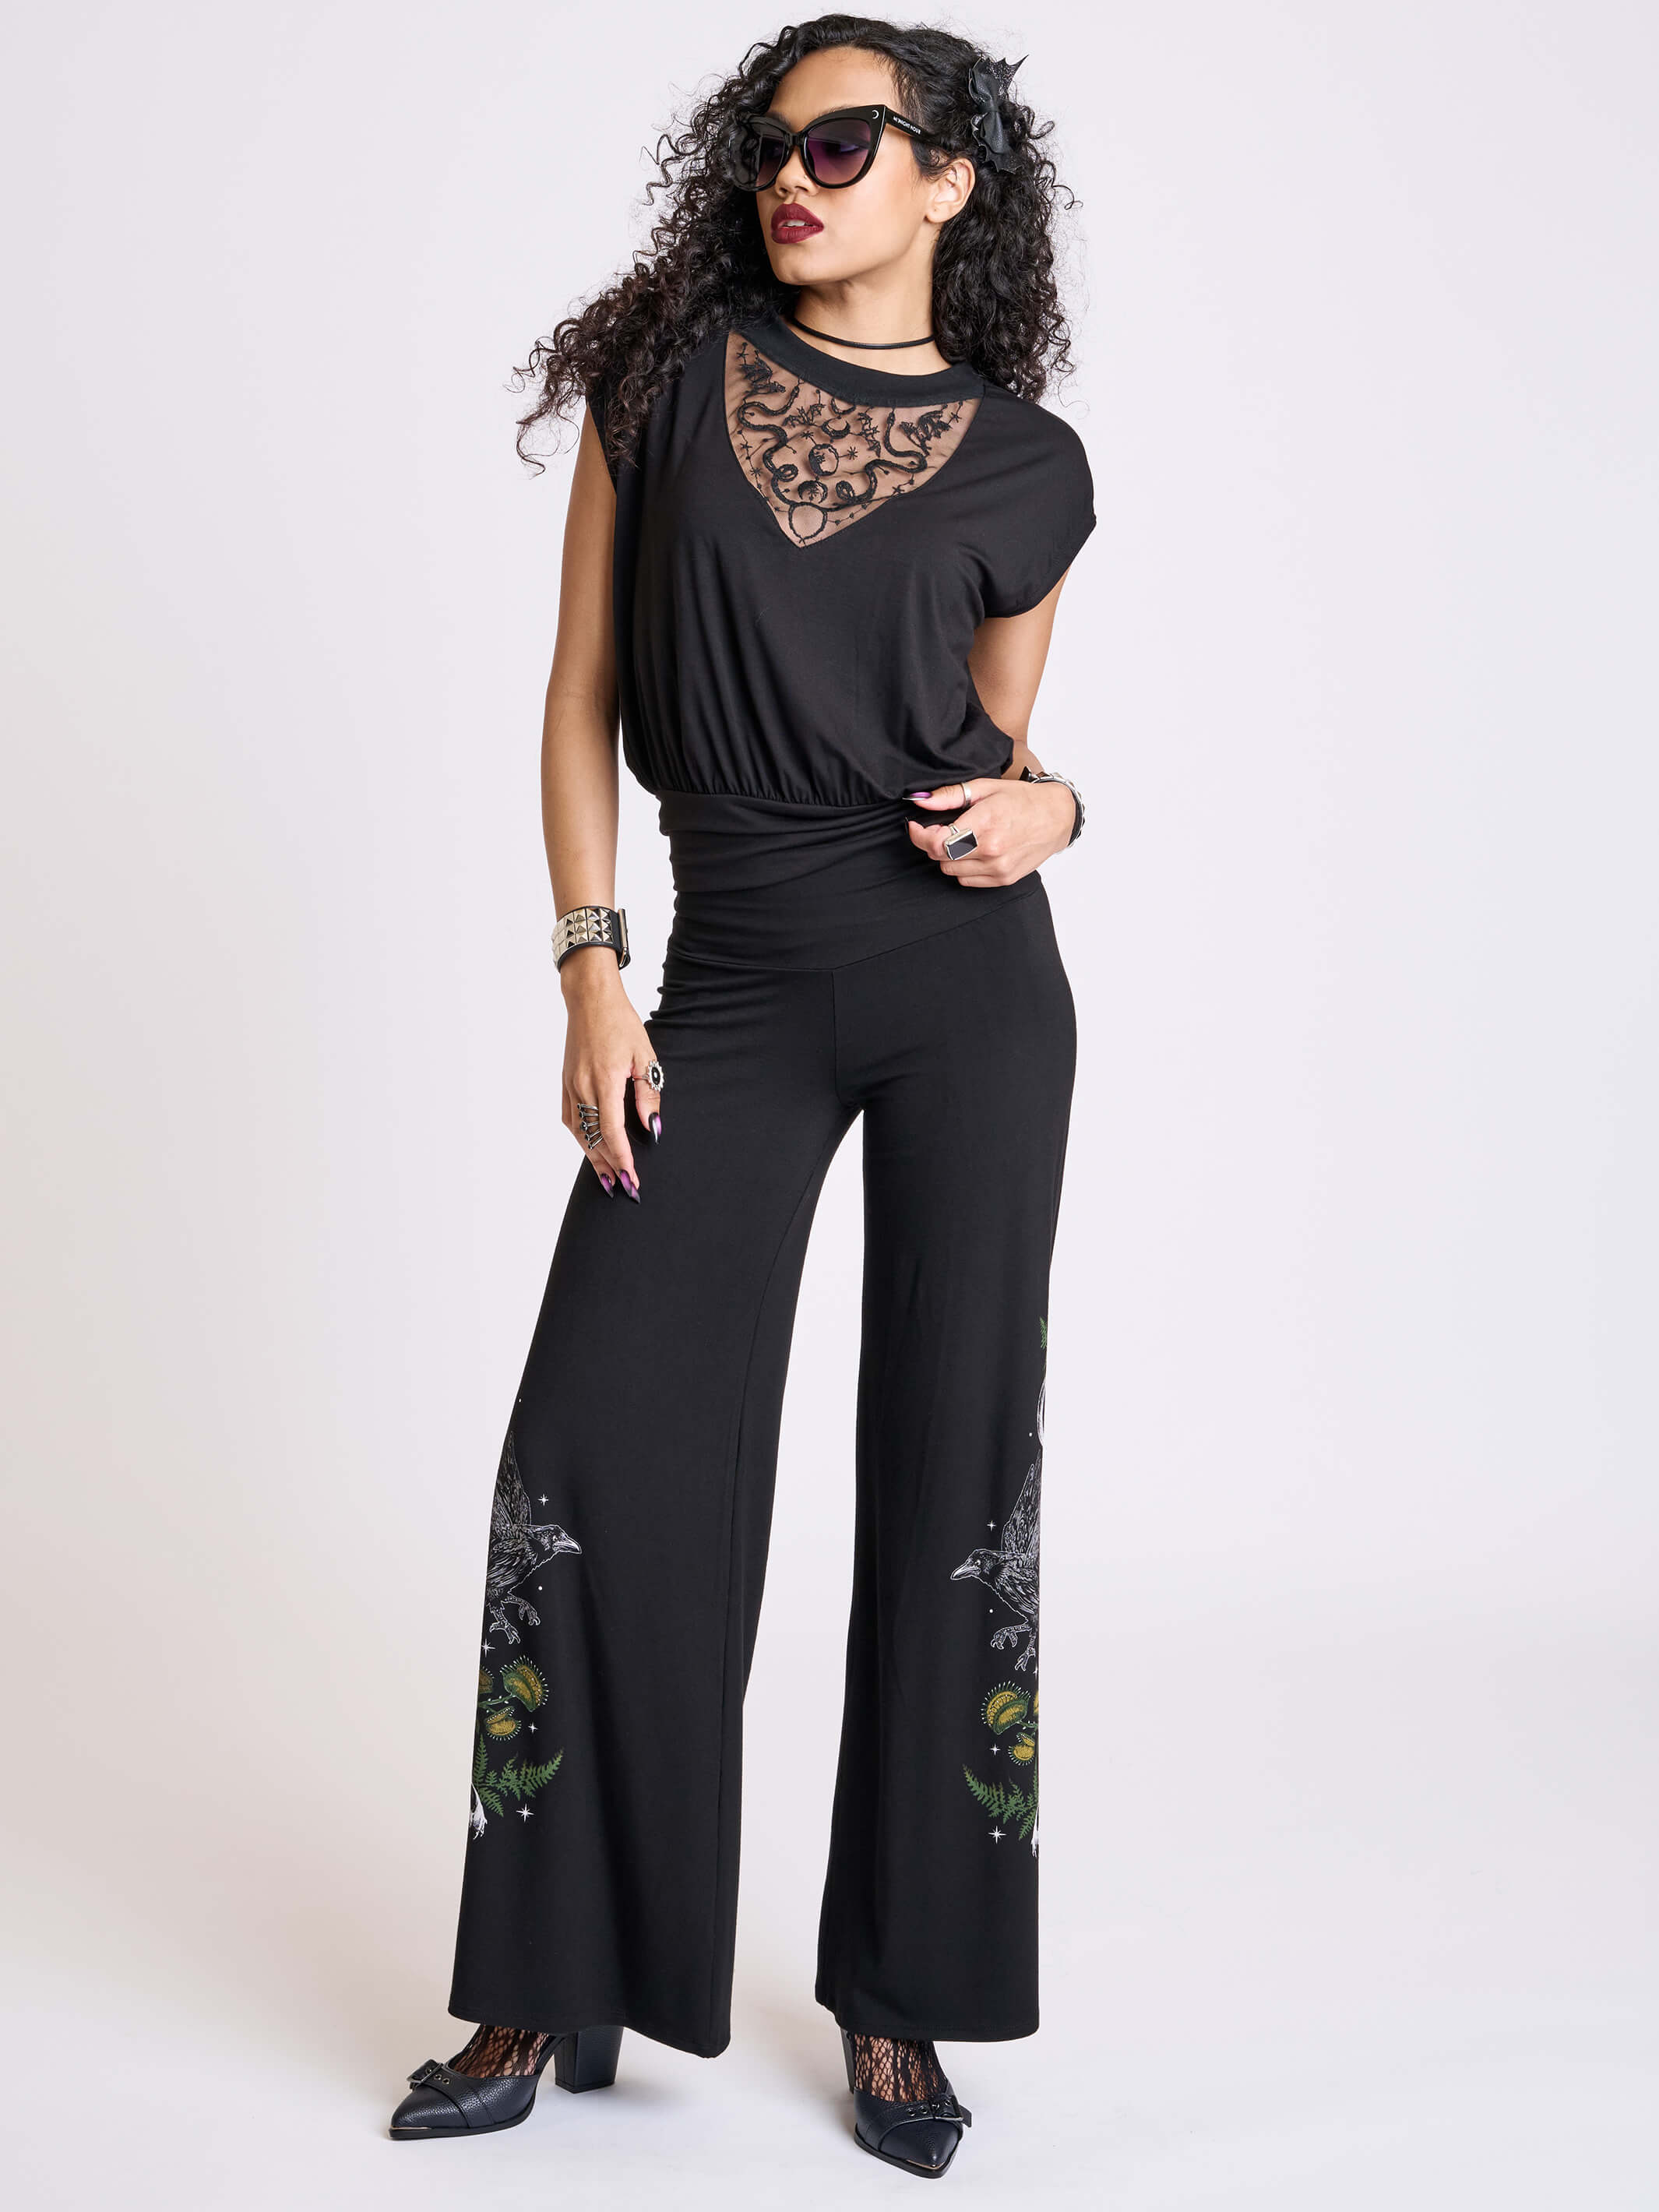 EMBROIDERED SNAKE BLOUSON TOP